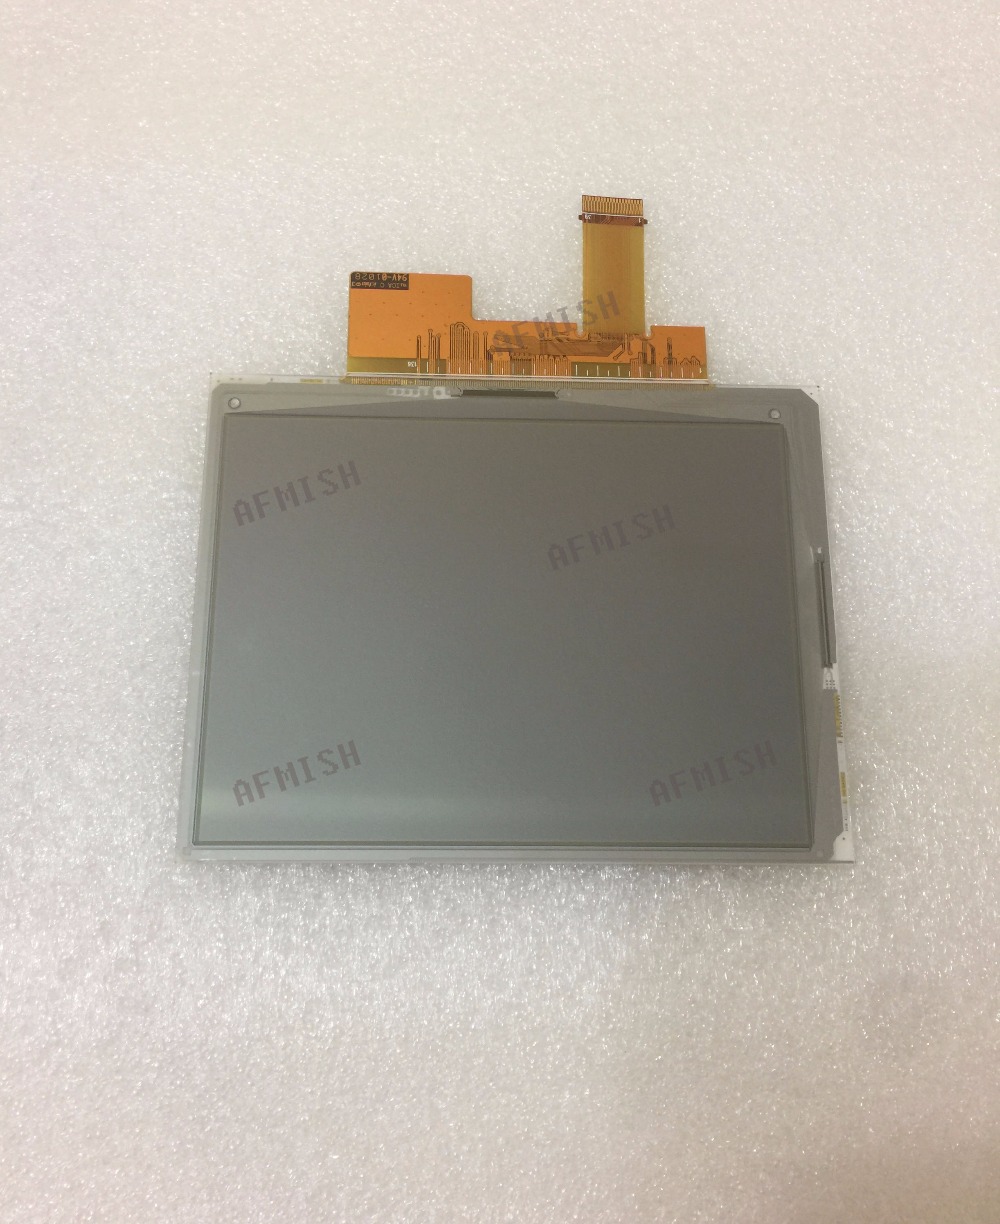 LB050S01-RD02 LG eink 100% new LCD Display screen for PRS-350 ebook reader free shipping